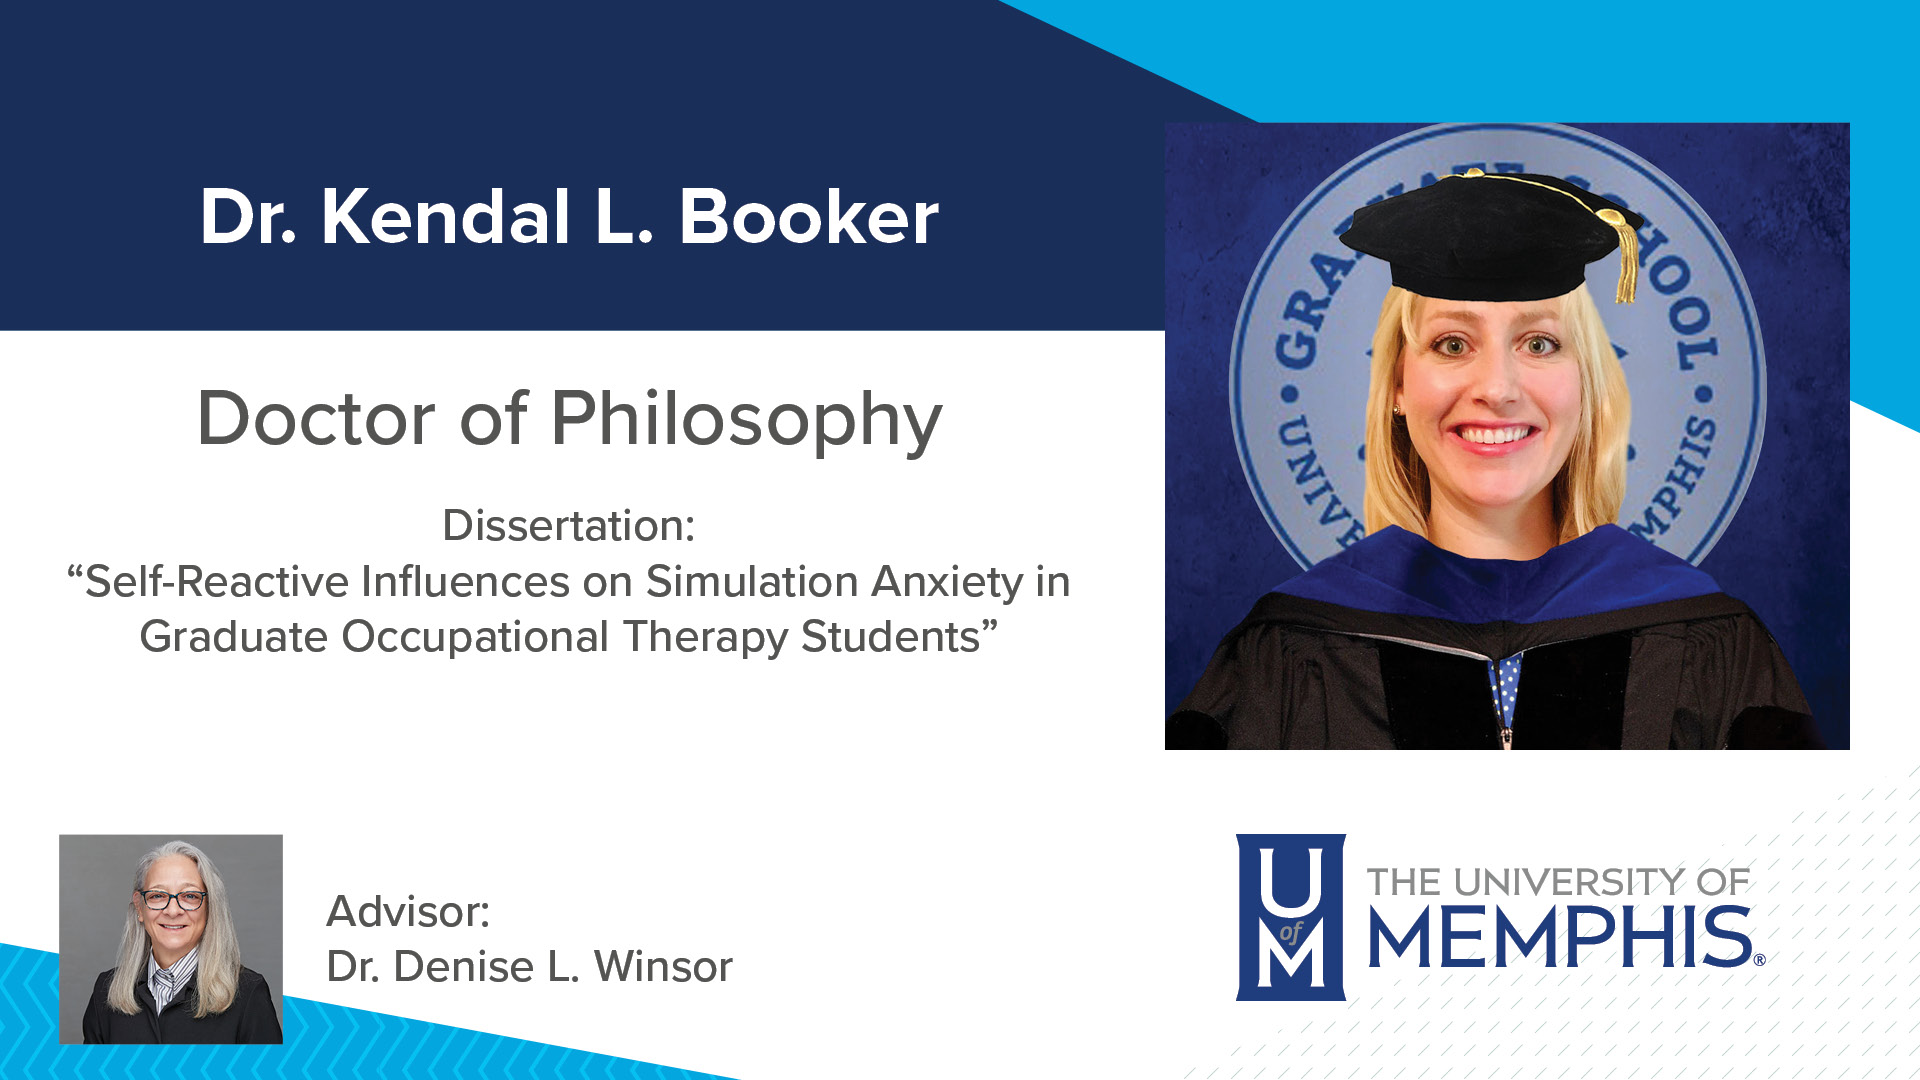 Dr. Kendal L Booker Doctor of Philosophy Dissertation: “Self-Reactive Influences on Simulation Anxiety in Graduate Occupational Therapy Students” Advisor: Dr. Denise L Winsor